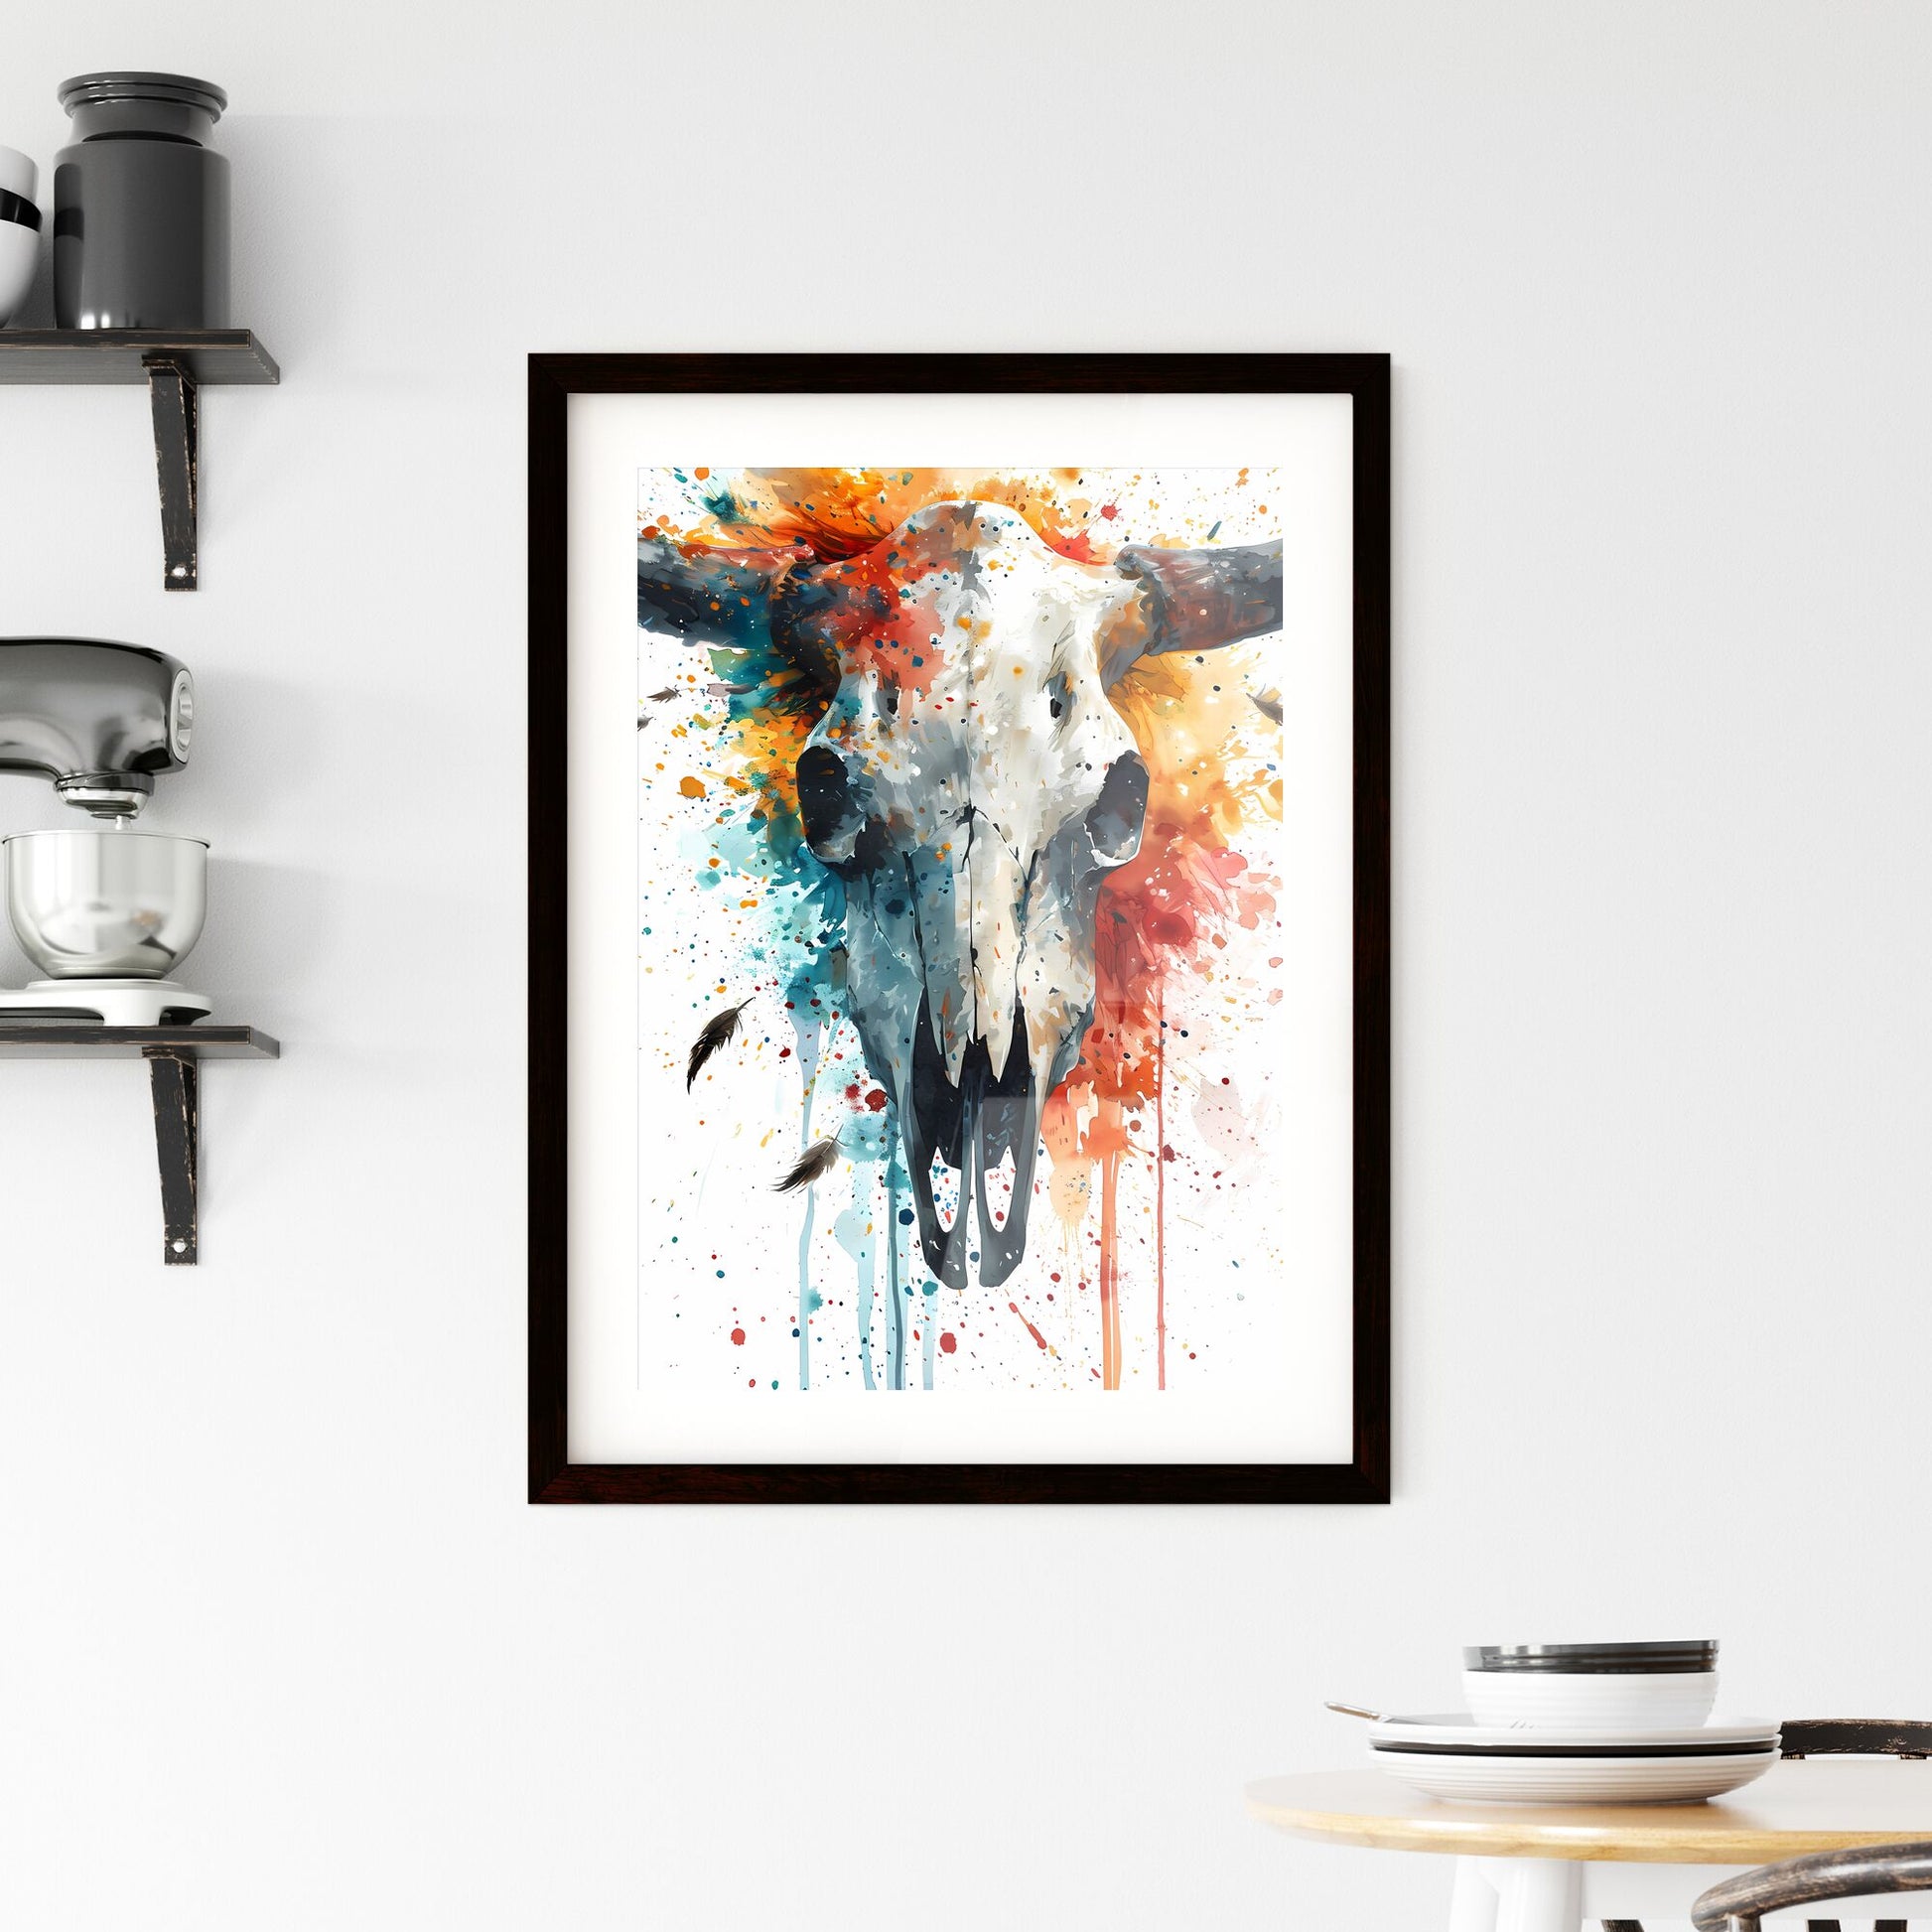 A Poster of native american cow skull - A Painting Of A Skull With Colorful Splashes Default Title